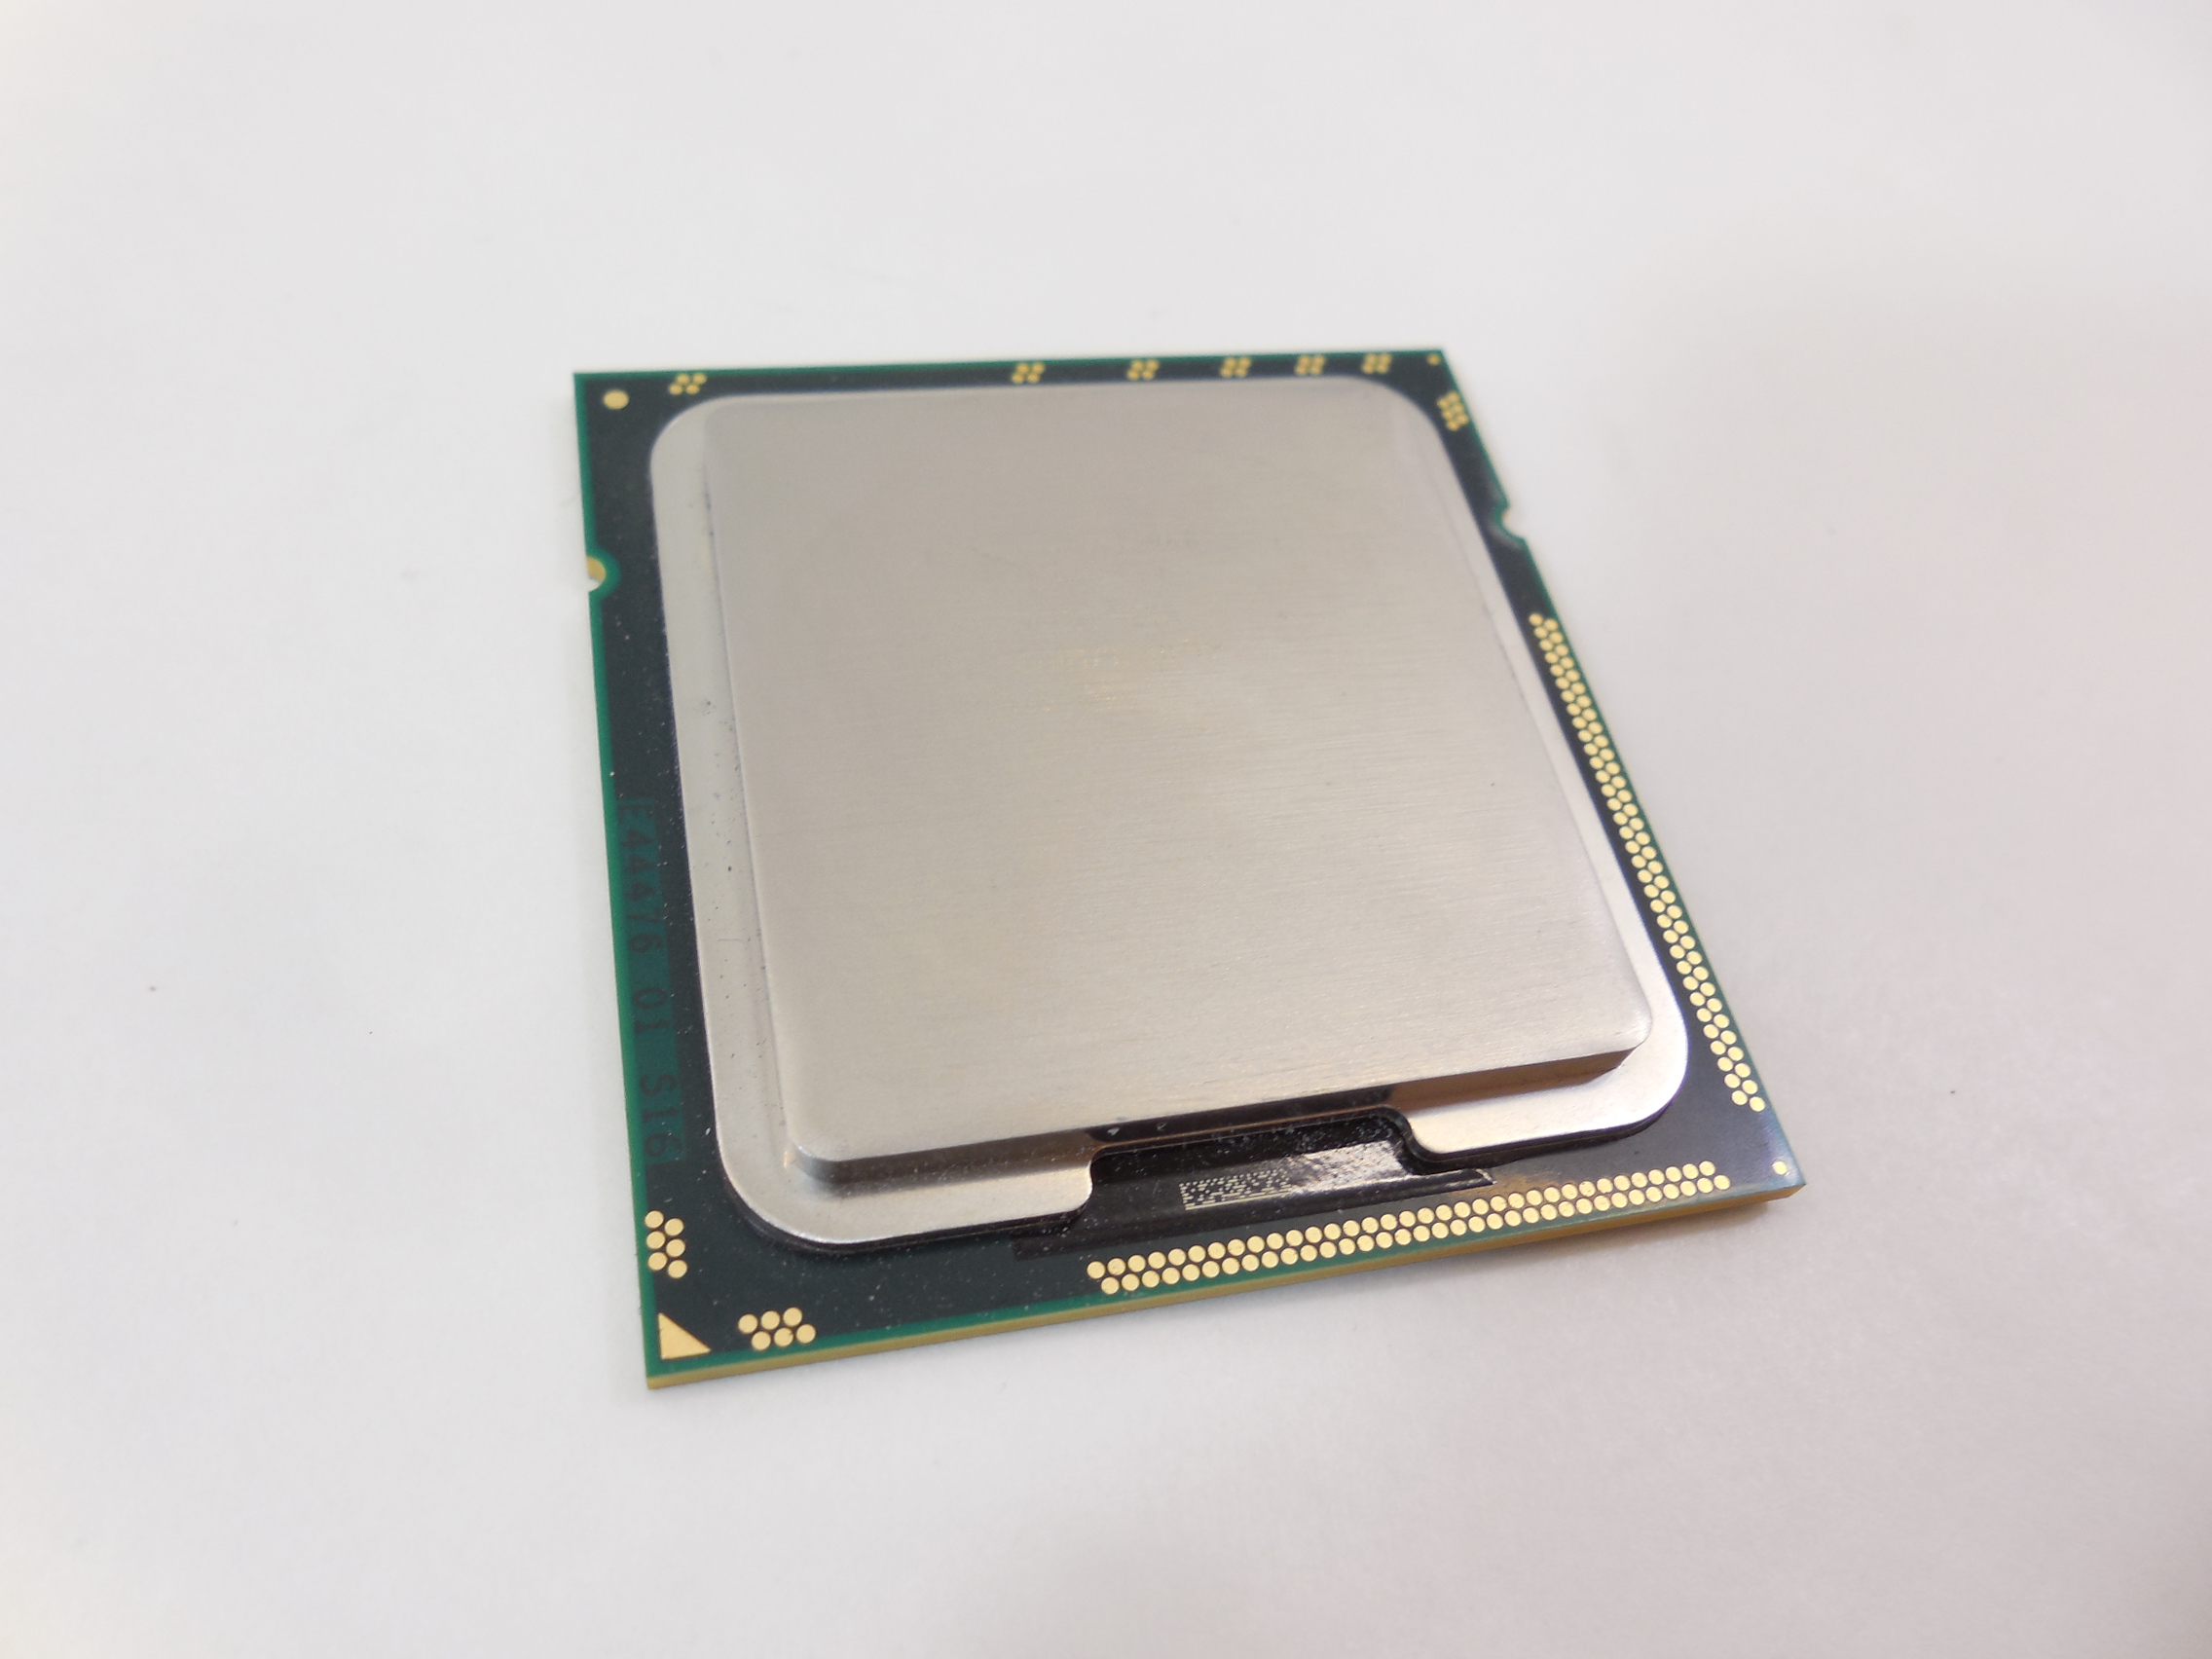 Overclocking: Effortless 4.4GHz+ on Air - The Sandy Bridge Review